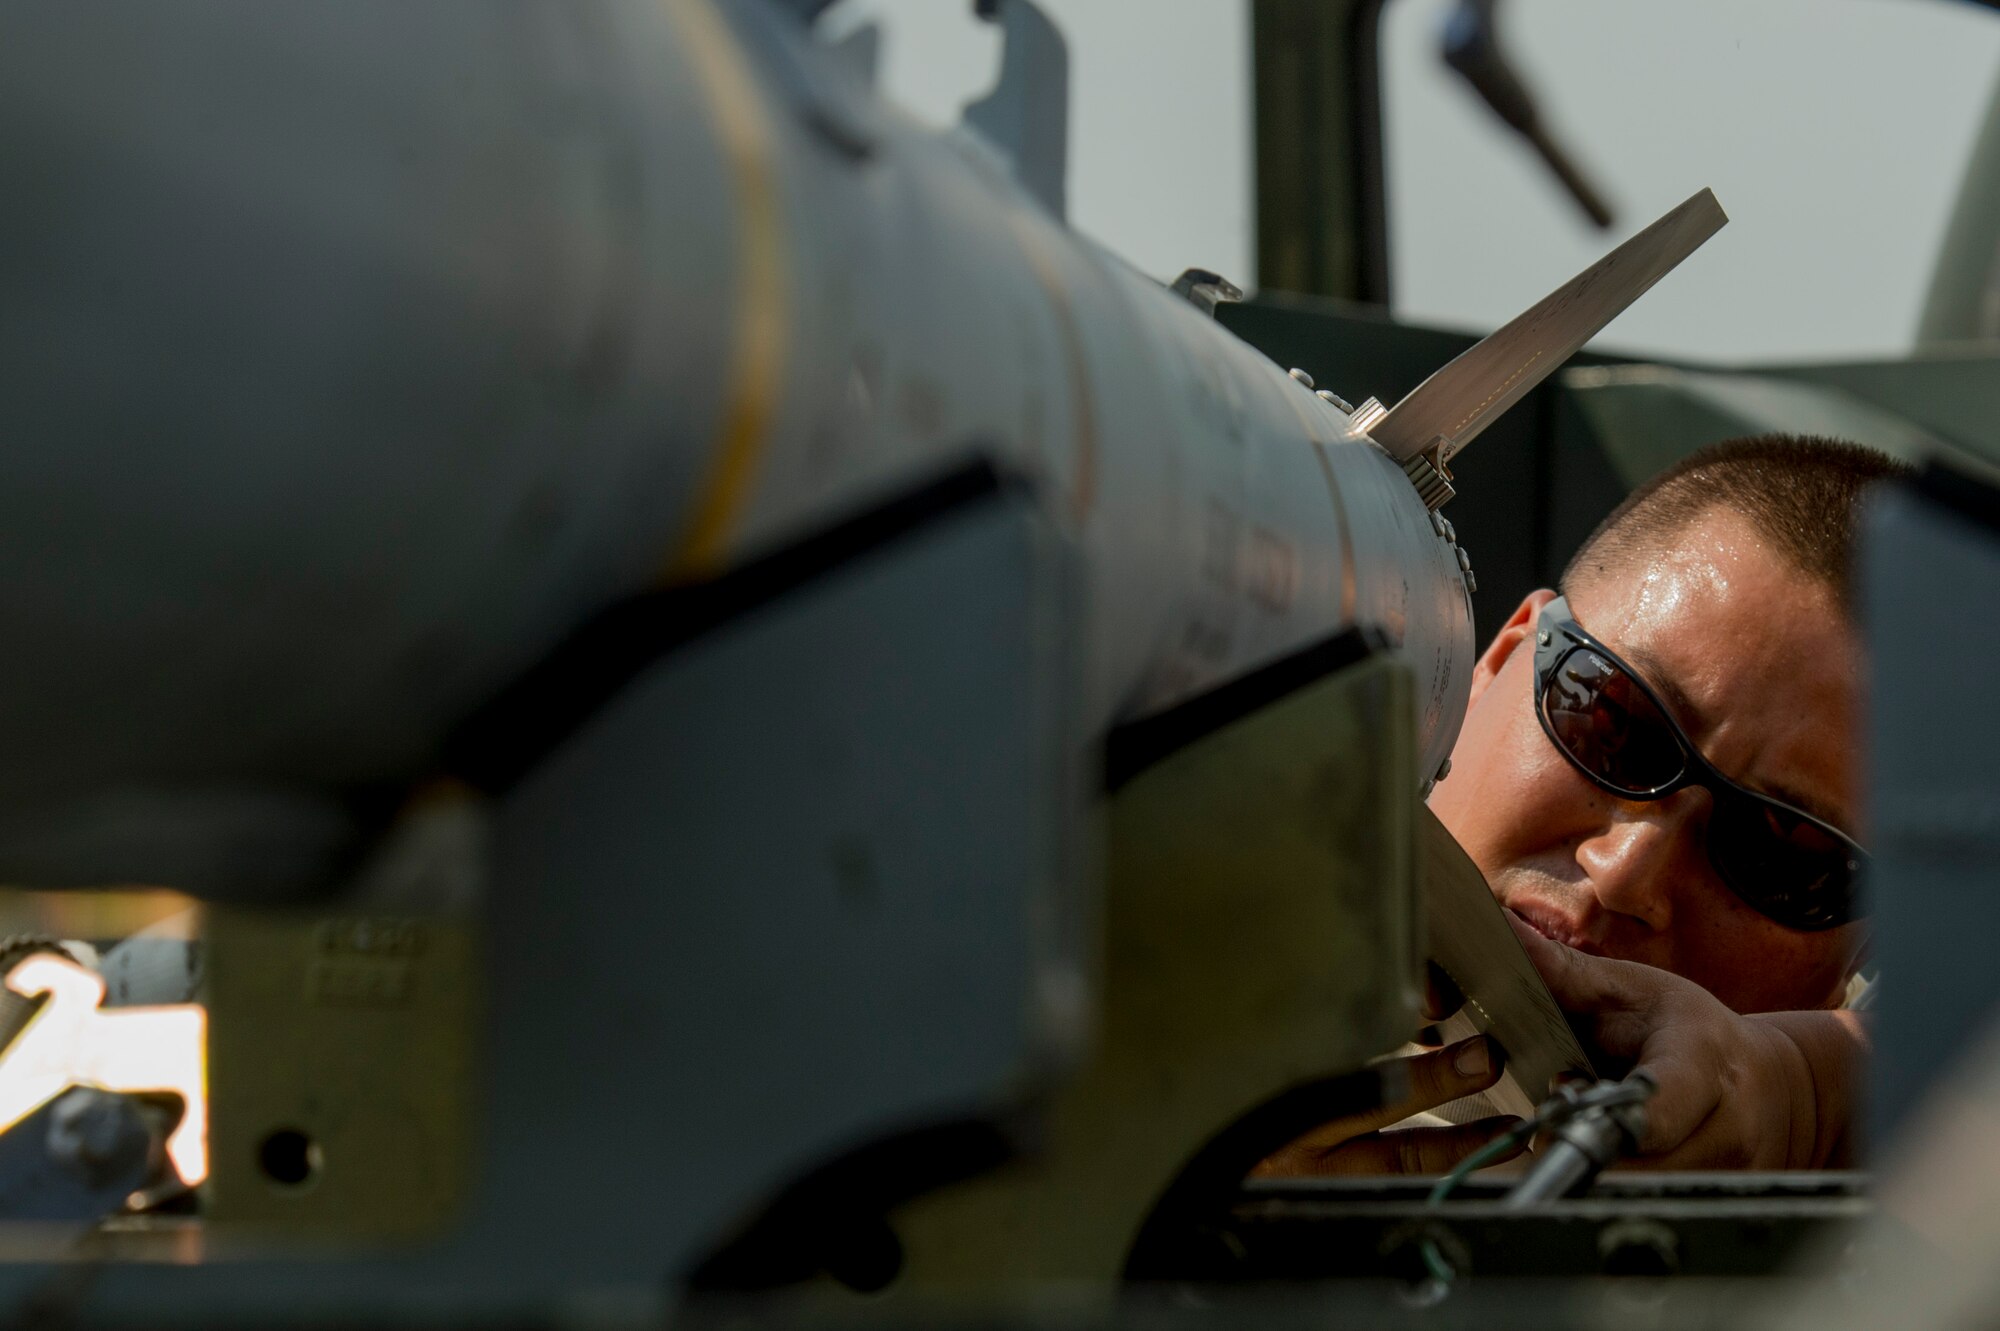 California Air National Guard Staff Sgt. Moau Koau, a 194th Expeditionary Fighter Squadron weapons craftsman, affixes wings on an AIM-120 advanced medium-range air-to-air missile on the flightline at Graf Ignatievo, Bulgaria, Sept. 8, 2016. Four of the squadron’s F-15C Eagle fighter aircraft will conduct joint NATO air policing missions with the Bulgarian air force to police the host nation’s sovereign airspace Sept. 9-16, 2016. The squadron forward deployed to Graf Ignatievo from Campia Turzii, Romania, where they serve on a theater security package deployment to Europe as a part of Operation Atlantic Resolve. (U.S. Air Force photo by Staff Sgt. Joe W. McFadden) 